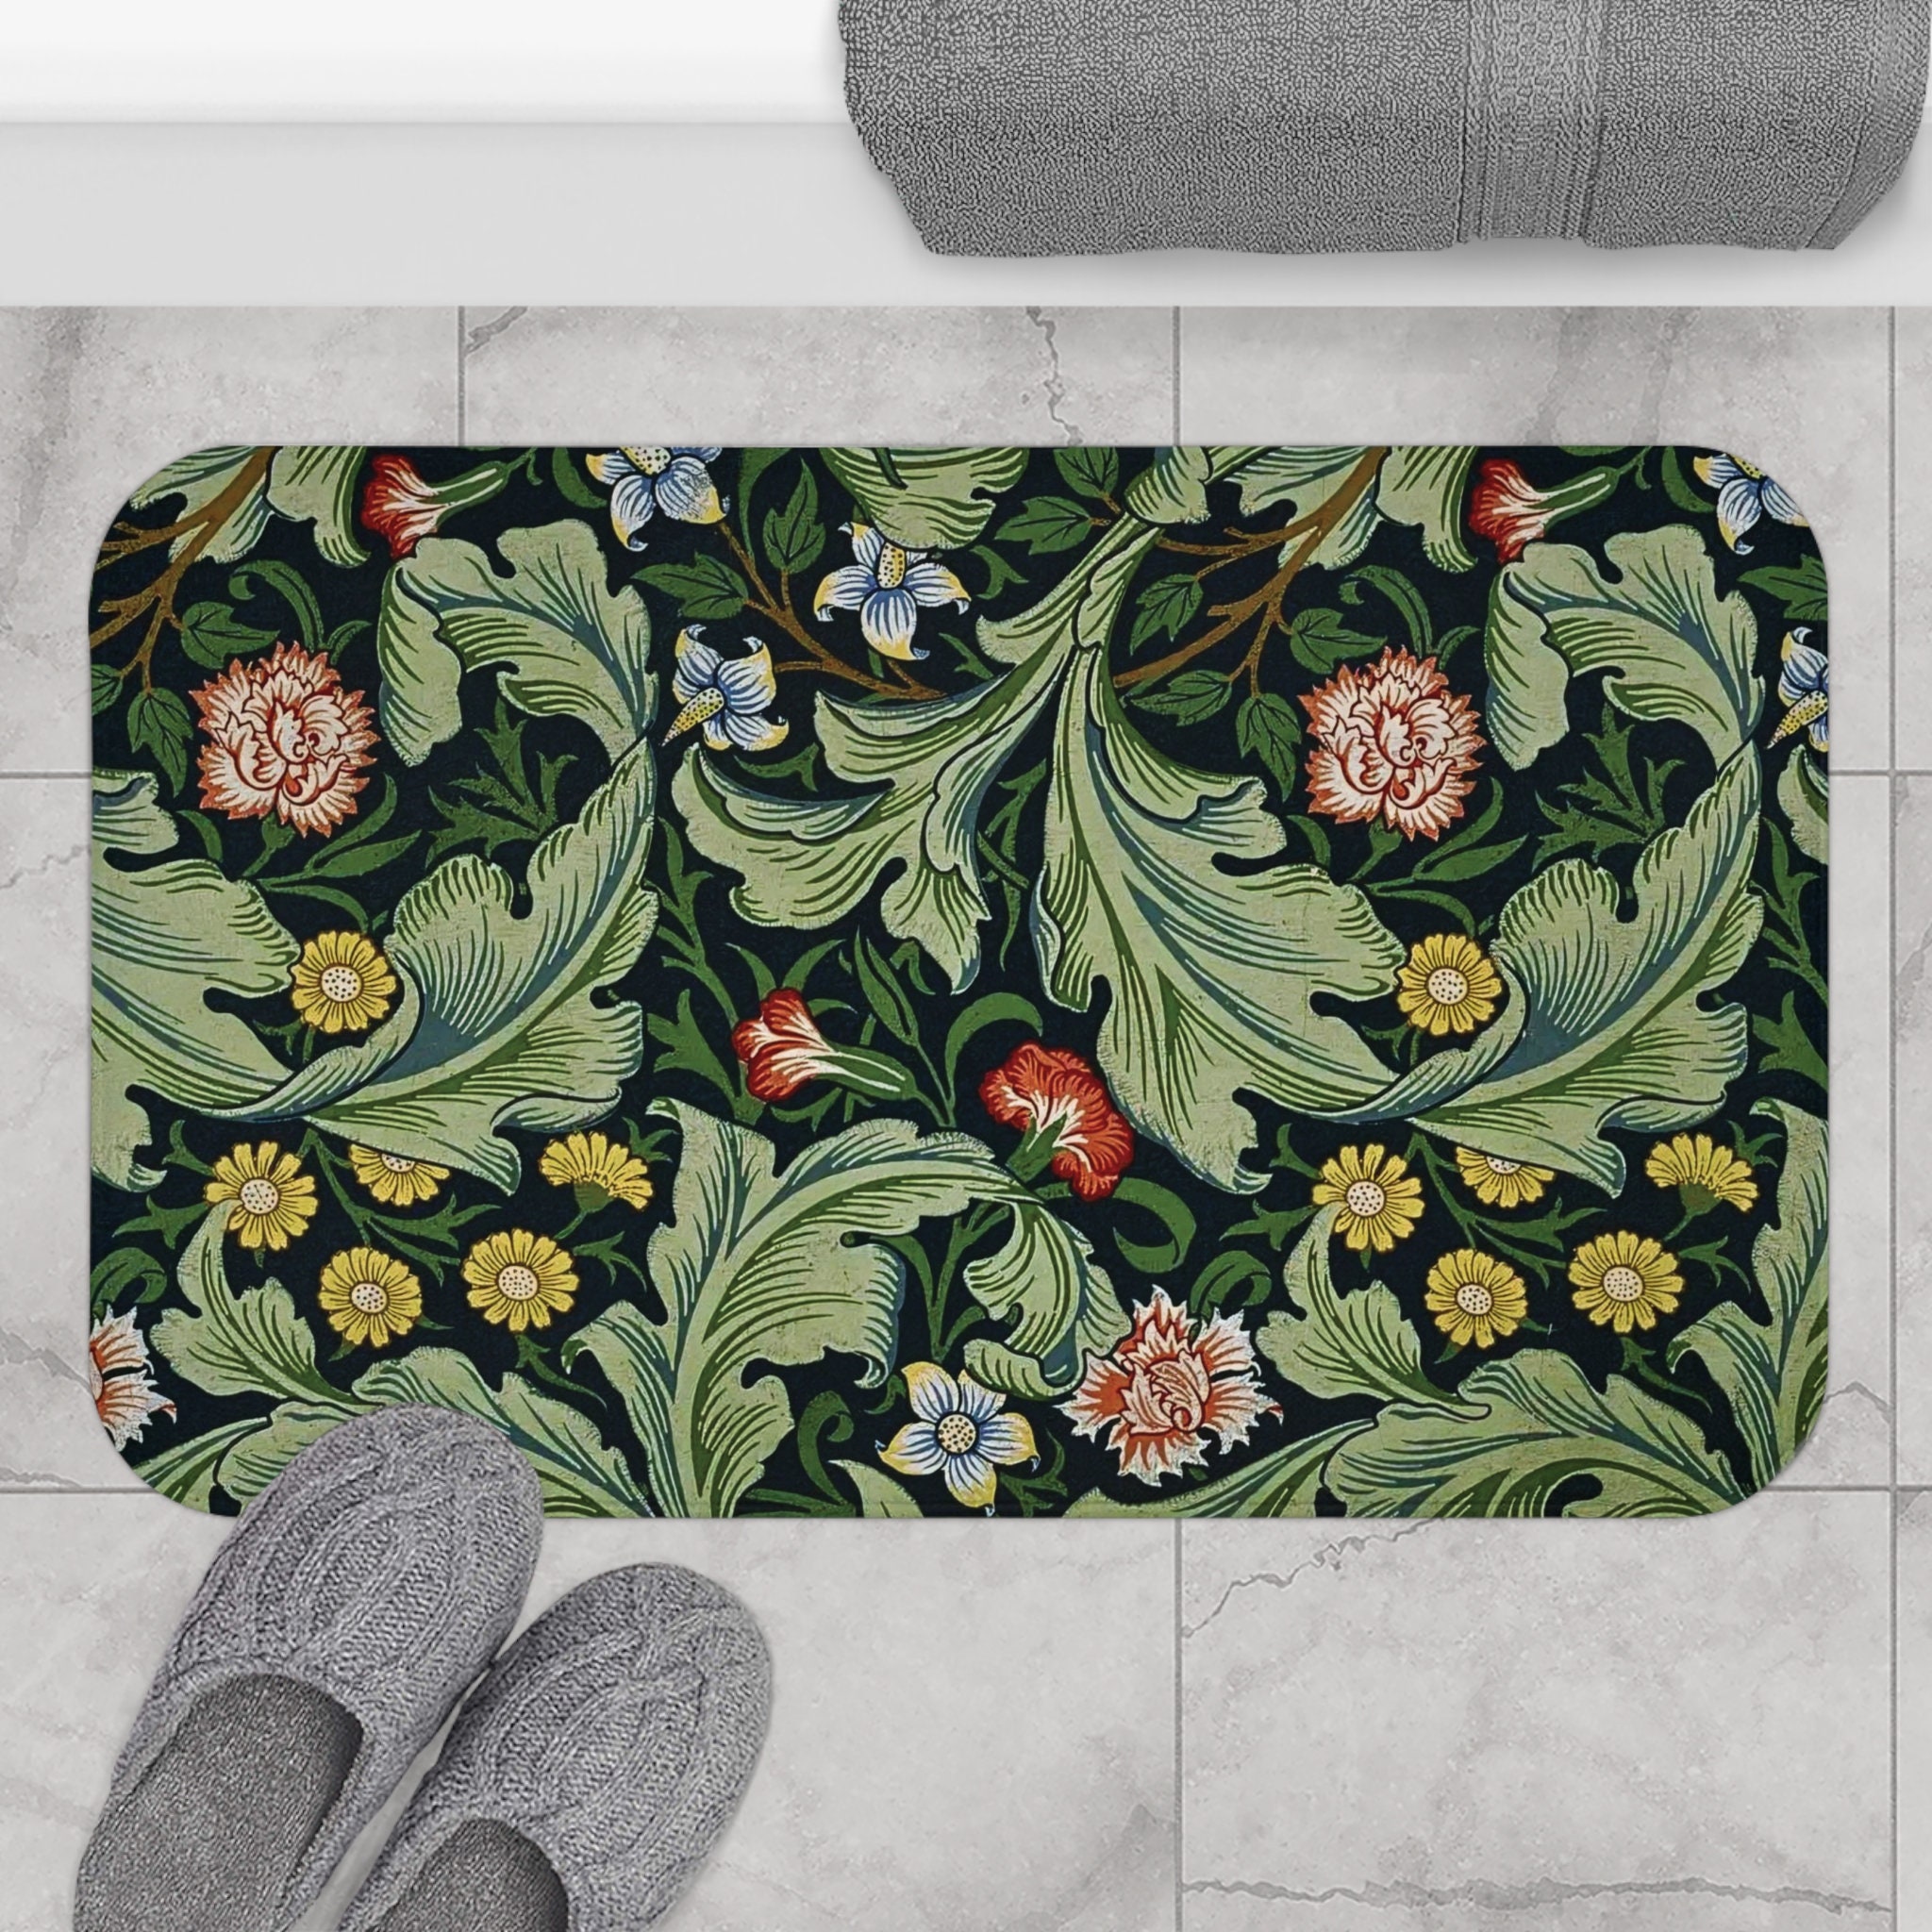 Flower Bathroom Mat - Leathaire - Polyester - Rubber - 4 Colors - ApolloBox